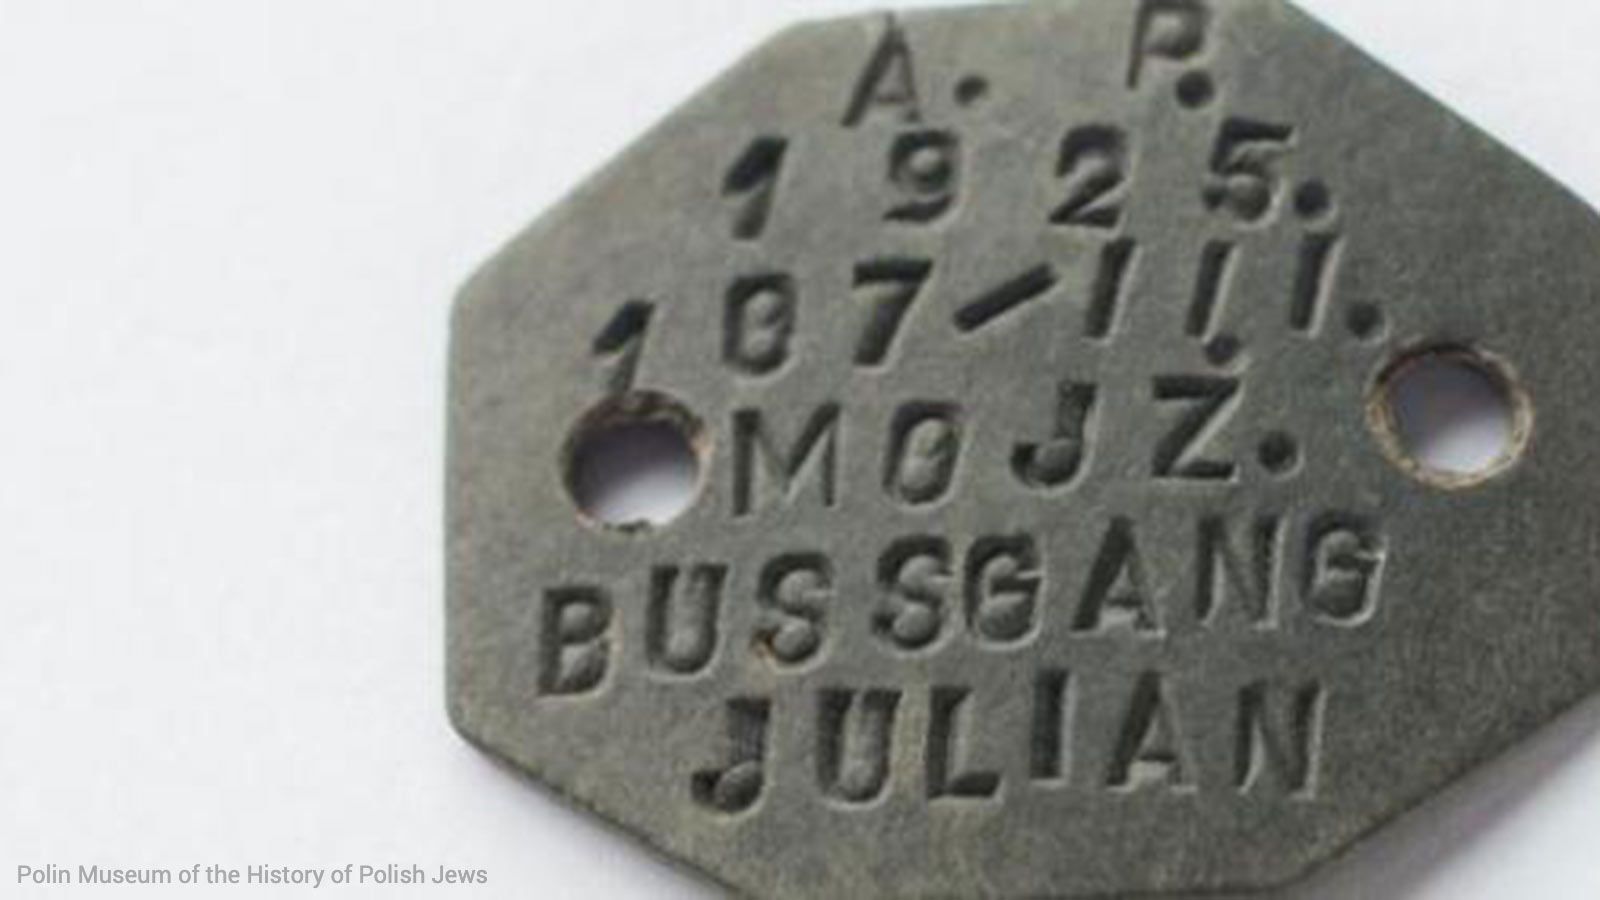 Dog tag of a Polish soldier who fought in the Second World War